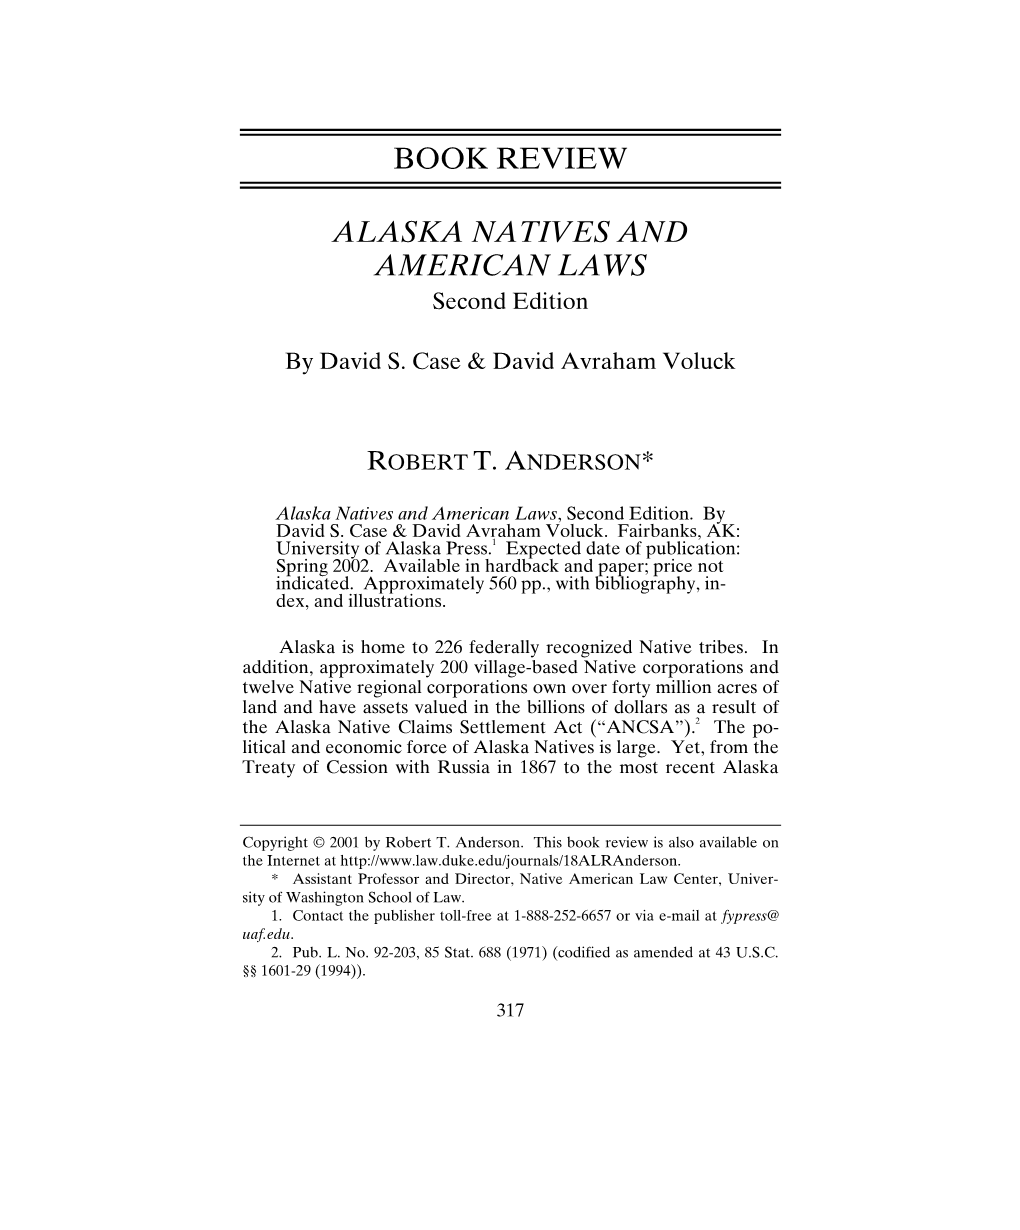 Review of Alaska Natives and American Laws, Second Edition, By